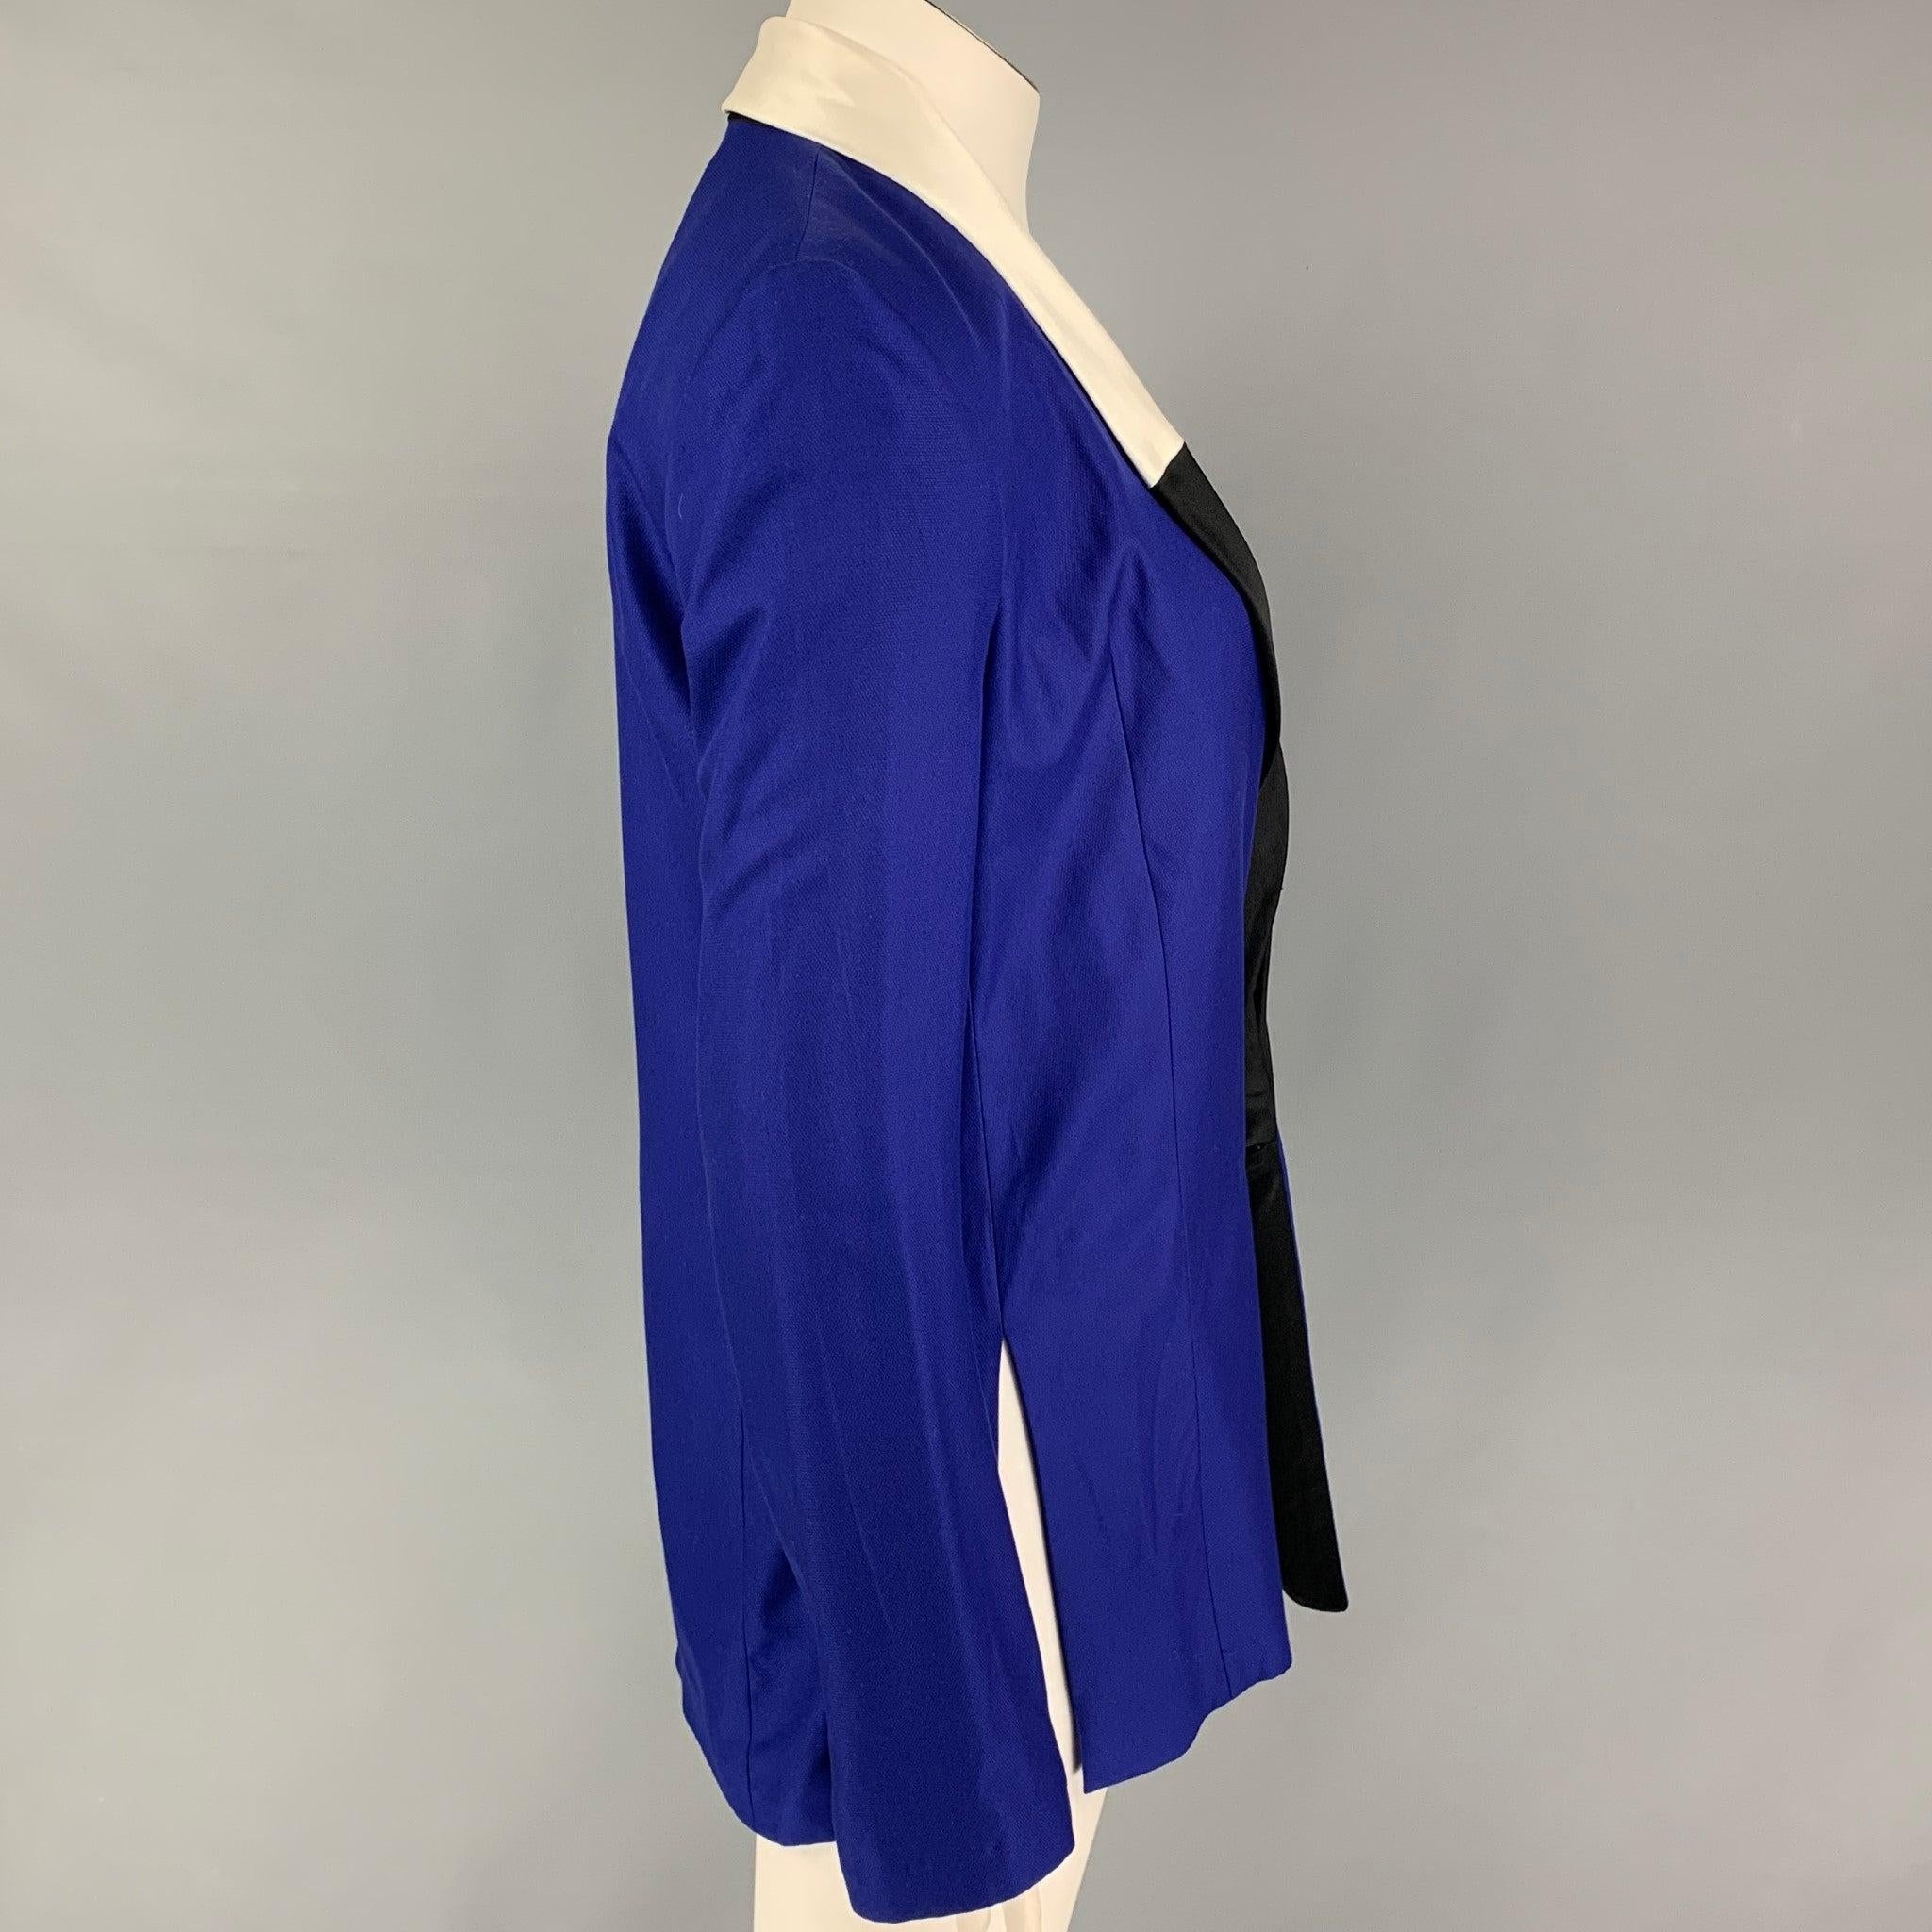 HAIDER ACKERMAN blazer come in a blue silk featuring a black & white color block shawl lapel, side slits, and a hidden button closure. Includes tags. Made in Italy.Very Good
Pre-Owned Condition. 

Marked:   40 

Measurements: 
 
Shoulder: 17 inches 